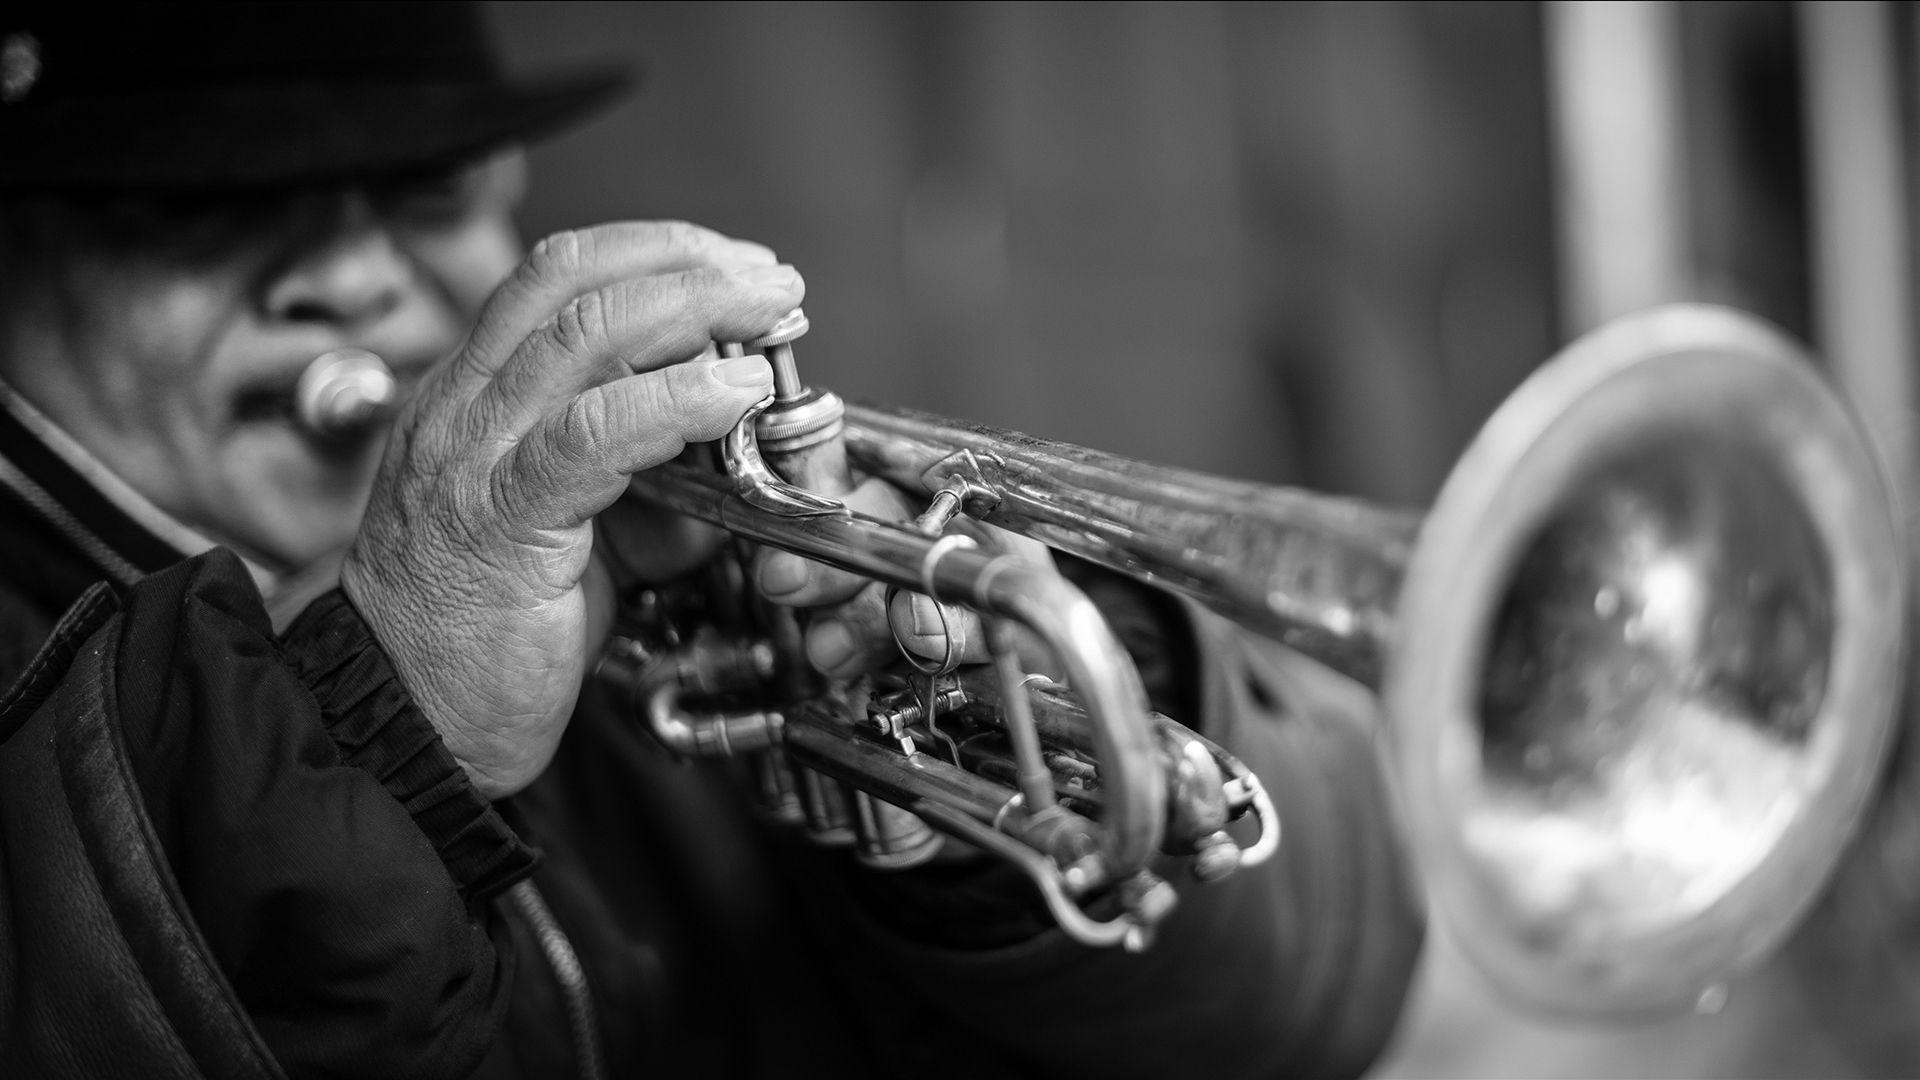 Trumpet: Black and white, A trumpeter, Virtuosity and improvisations, Musician. 1920x1080 Full HD Wallpaper.